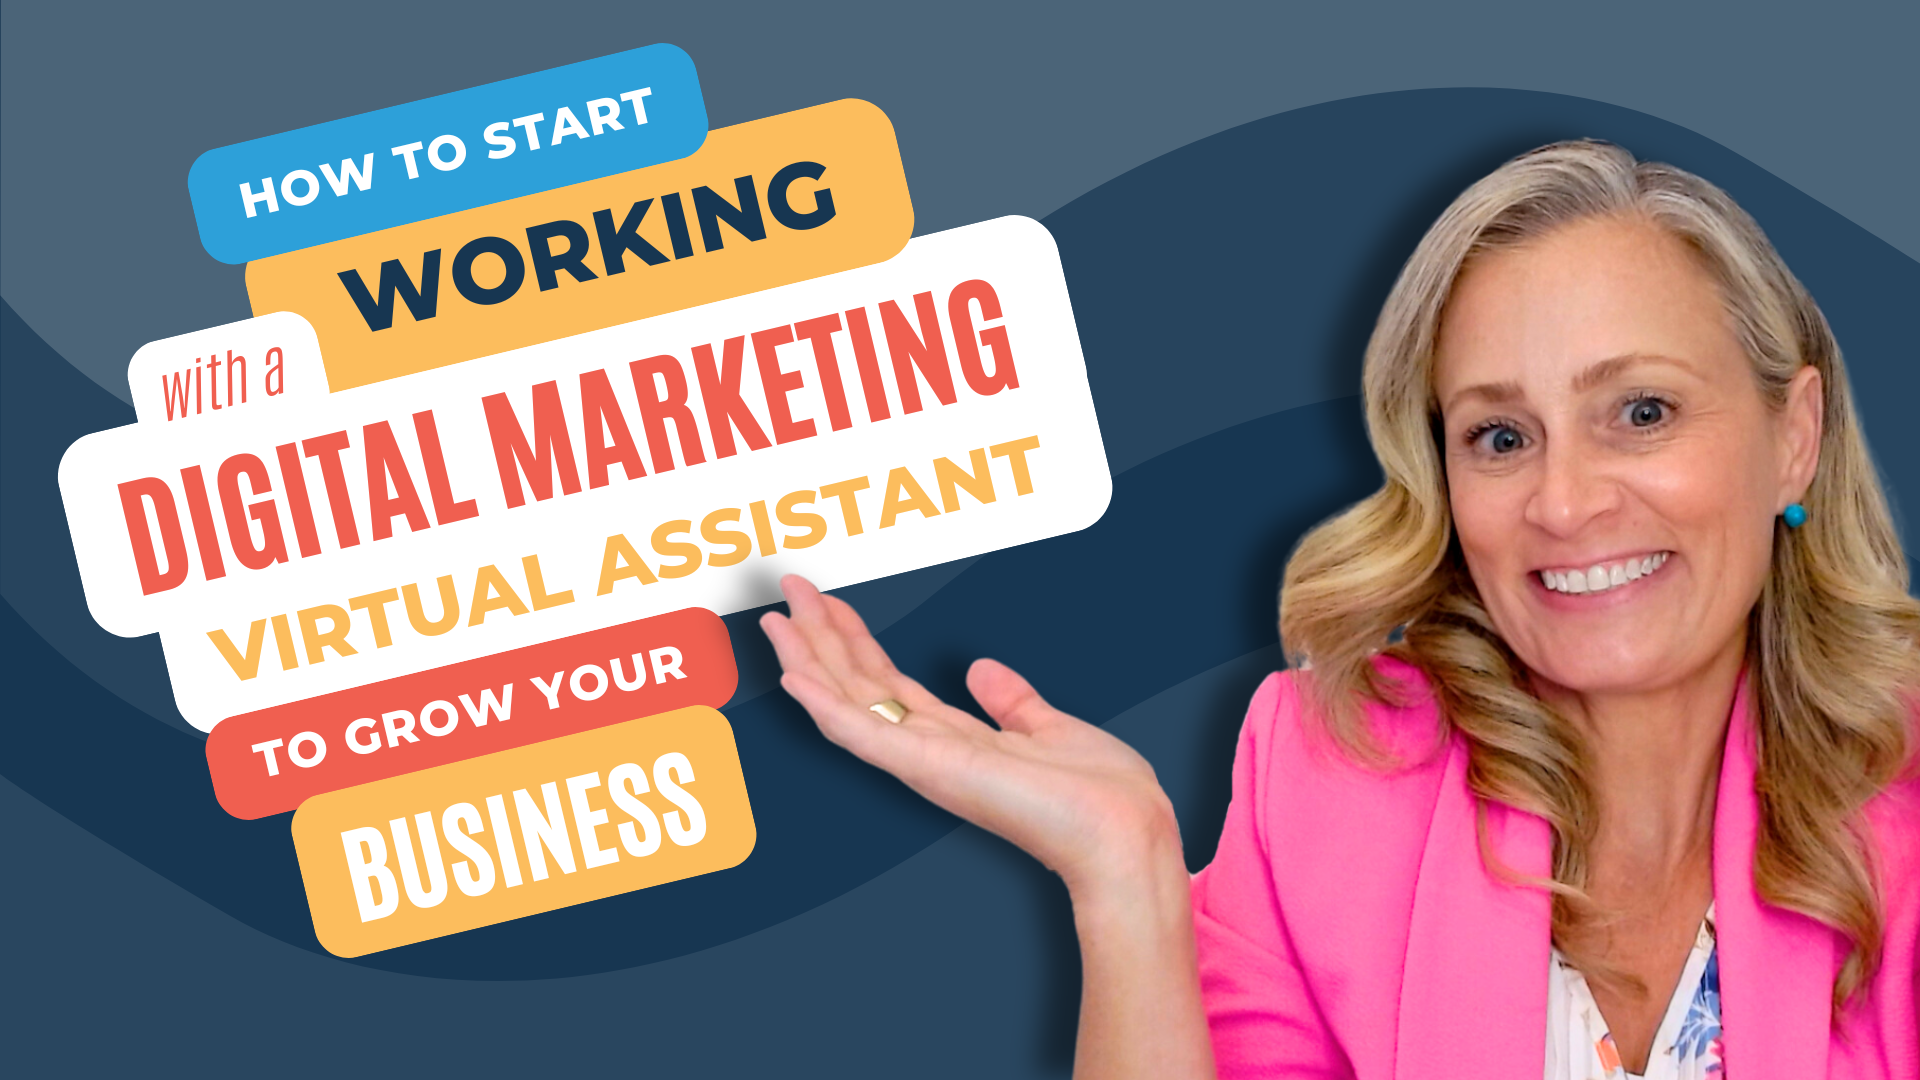 How to Start Working With A Digital Marketing Virtual Assistant To Grow Your Business